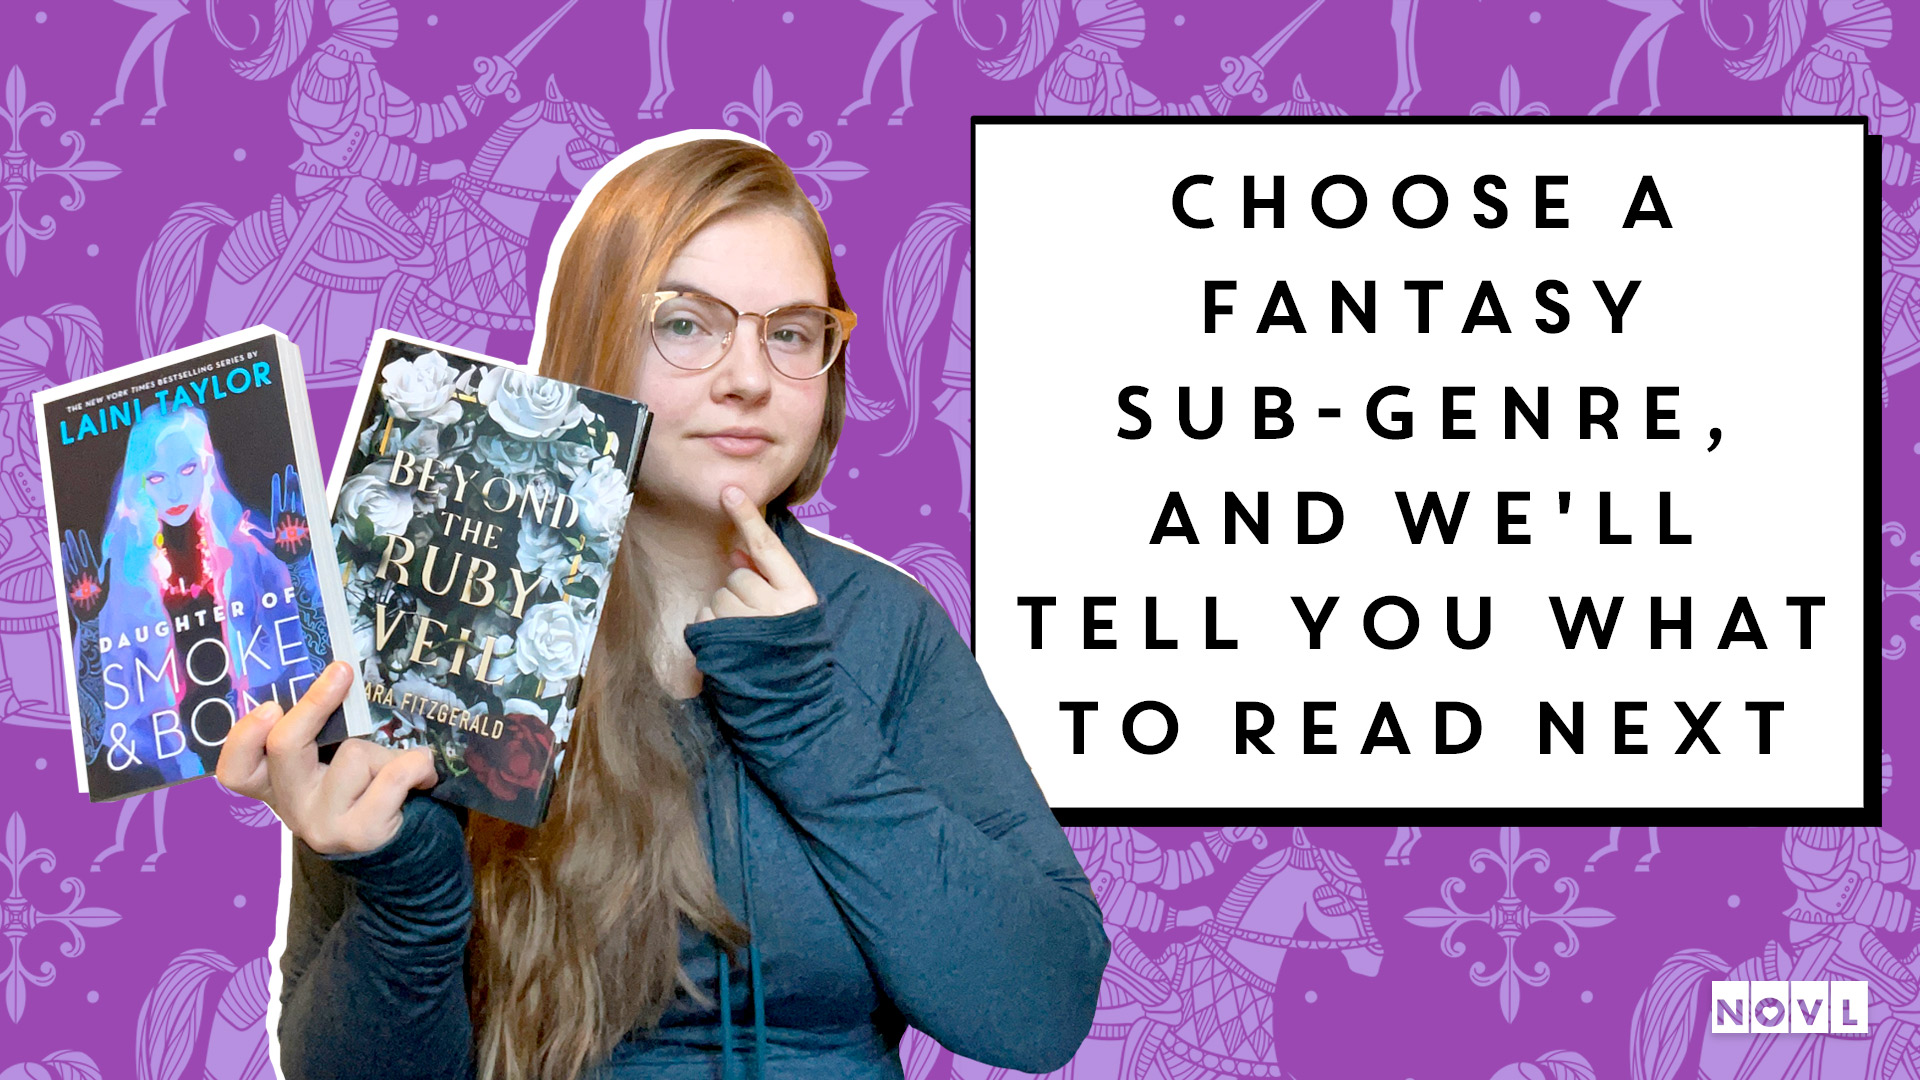 The NOVL Blog, Featured Image for Article: Choose a Fantasy Sub-Genre, and We'll Tell You What to Read Next